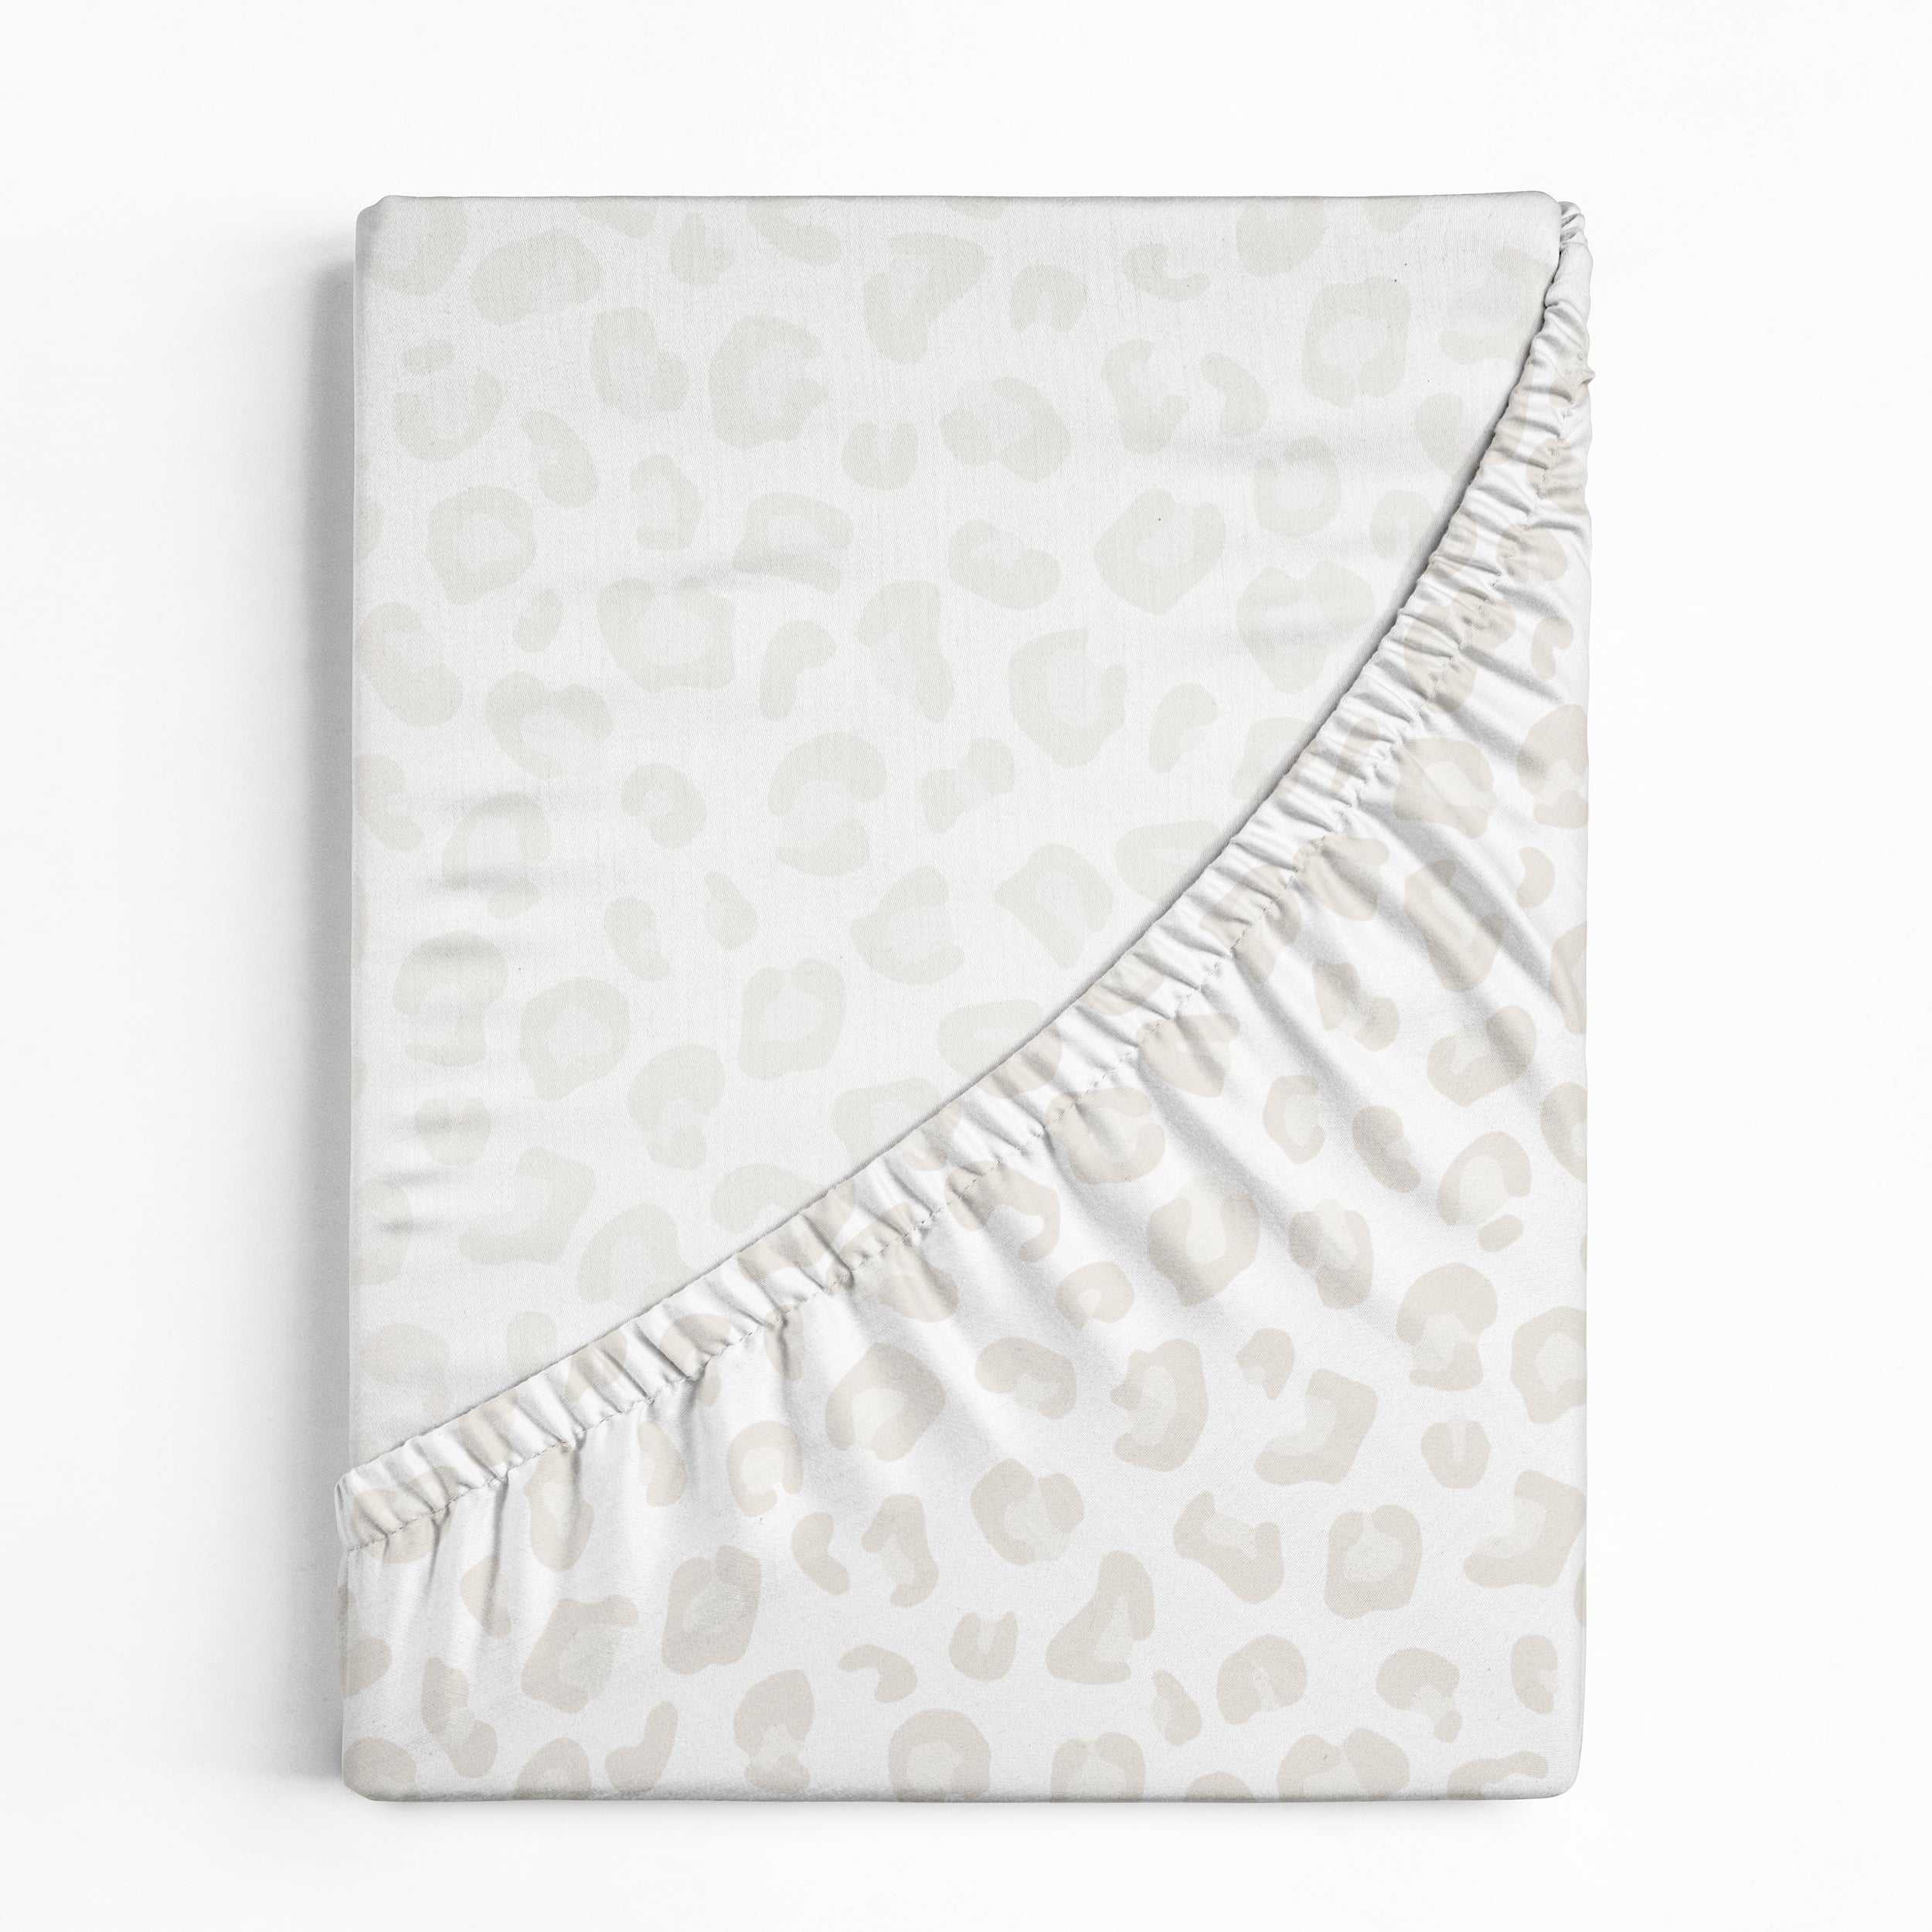 A soft, fleece Crib Fitted Sheet with Pillowcase - Wild from Makemake Organics with a subtle leopard print design, neatly folded with one corner turned down to display the fleece texture, isolated on a white background.